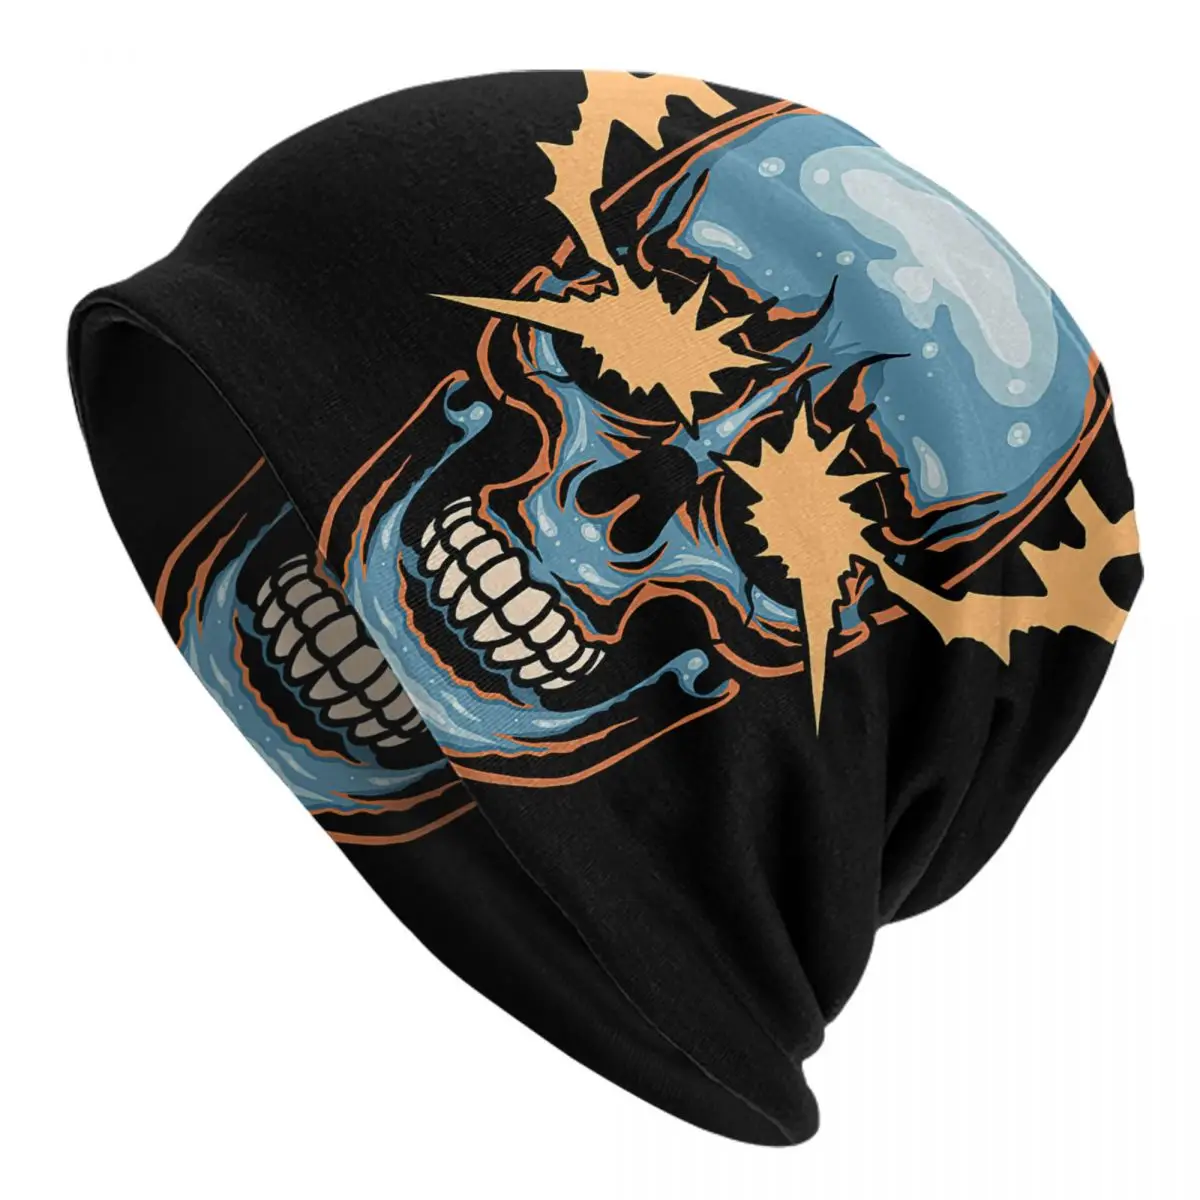 Atomic,america, Skull Adult Men's Women's Knit Hat Keep warm winter Funny knitted hat